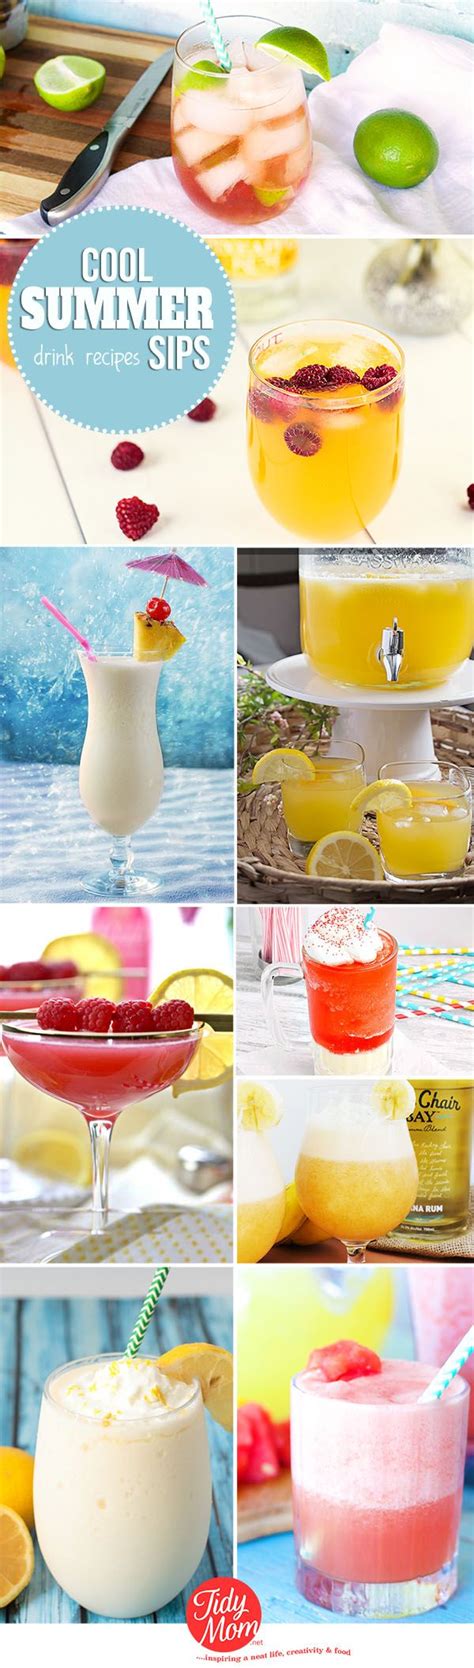 Cool Summer Sips Tidymom Fruity Drink Recipes Fruity Drinks Summer Drinks